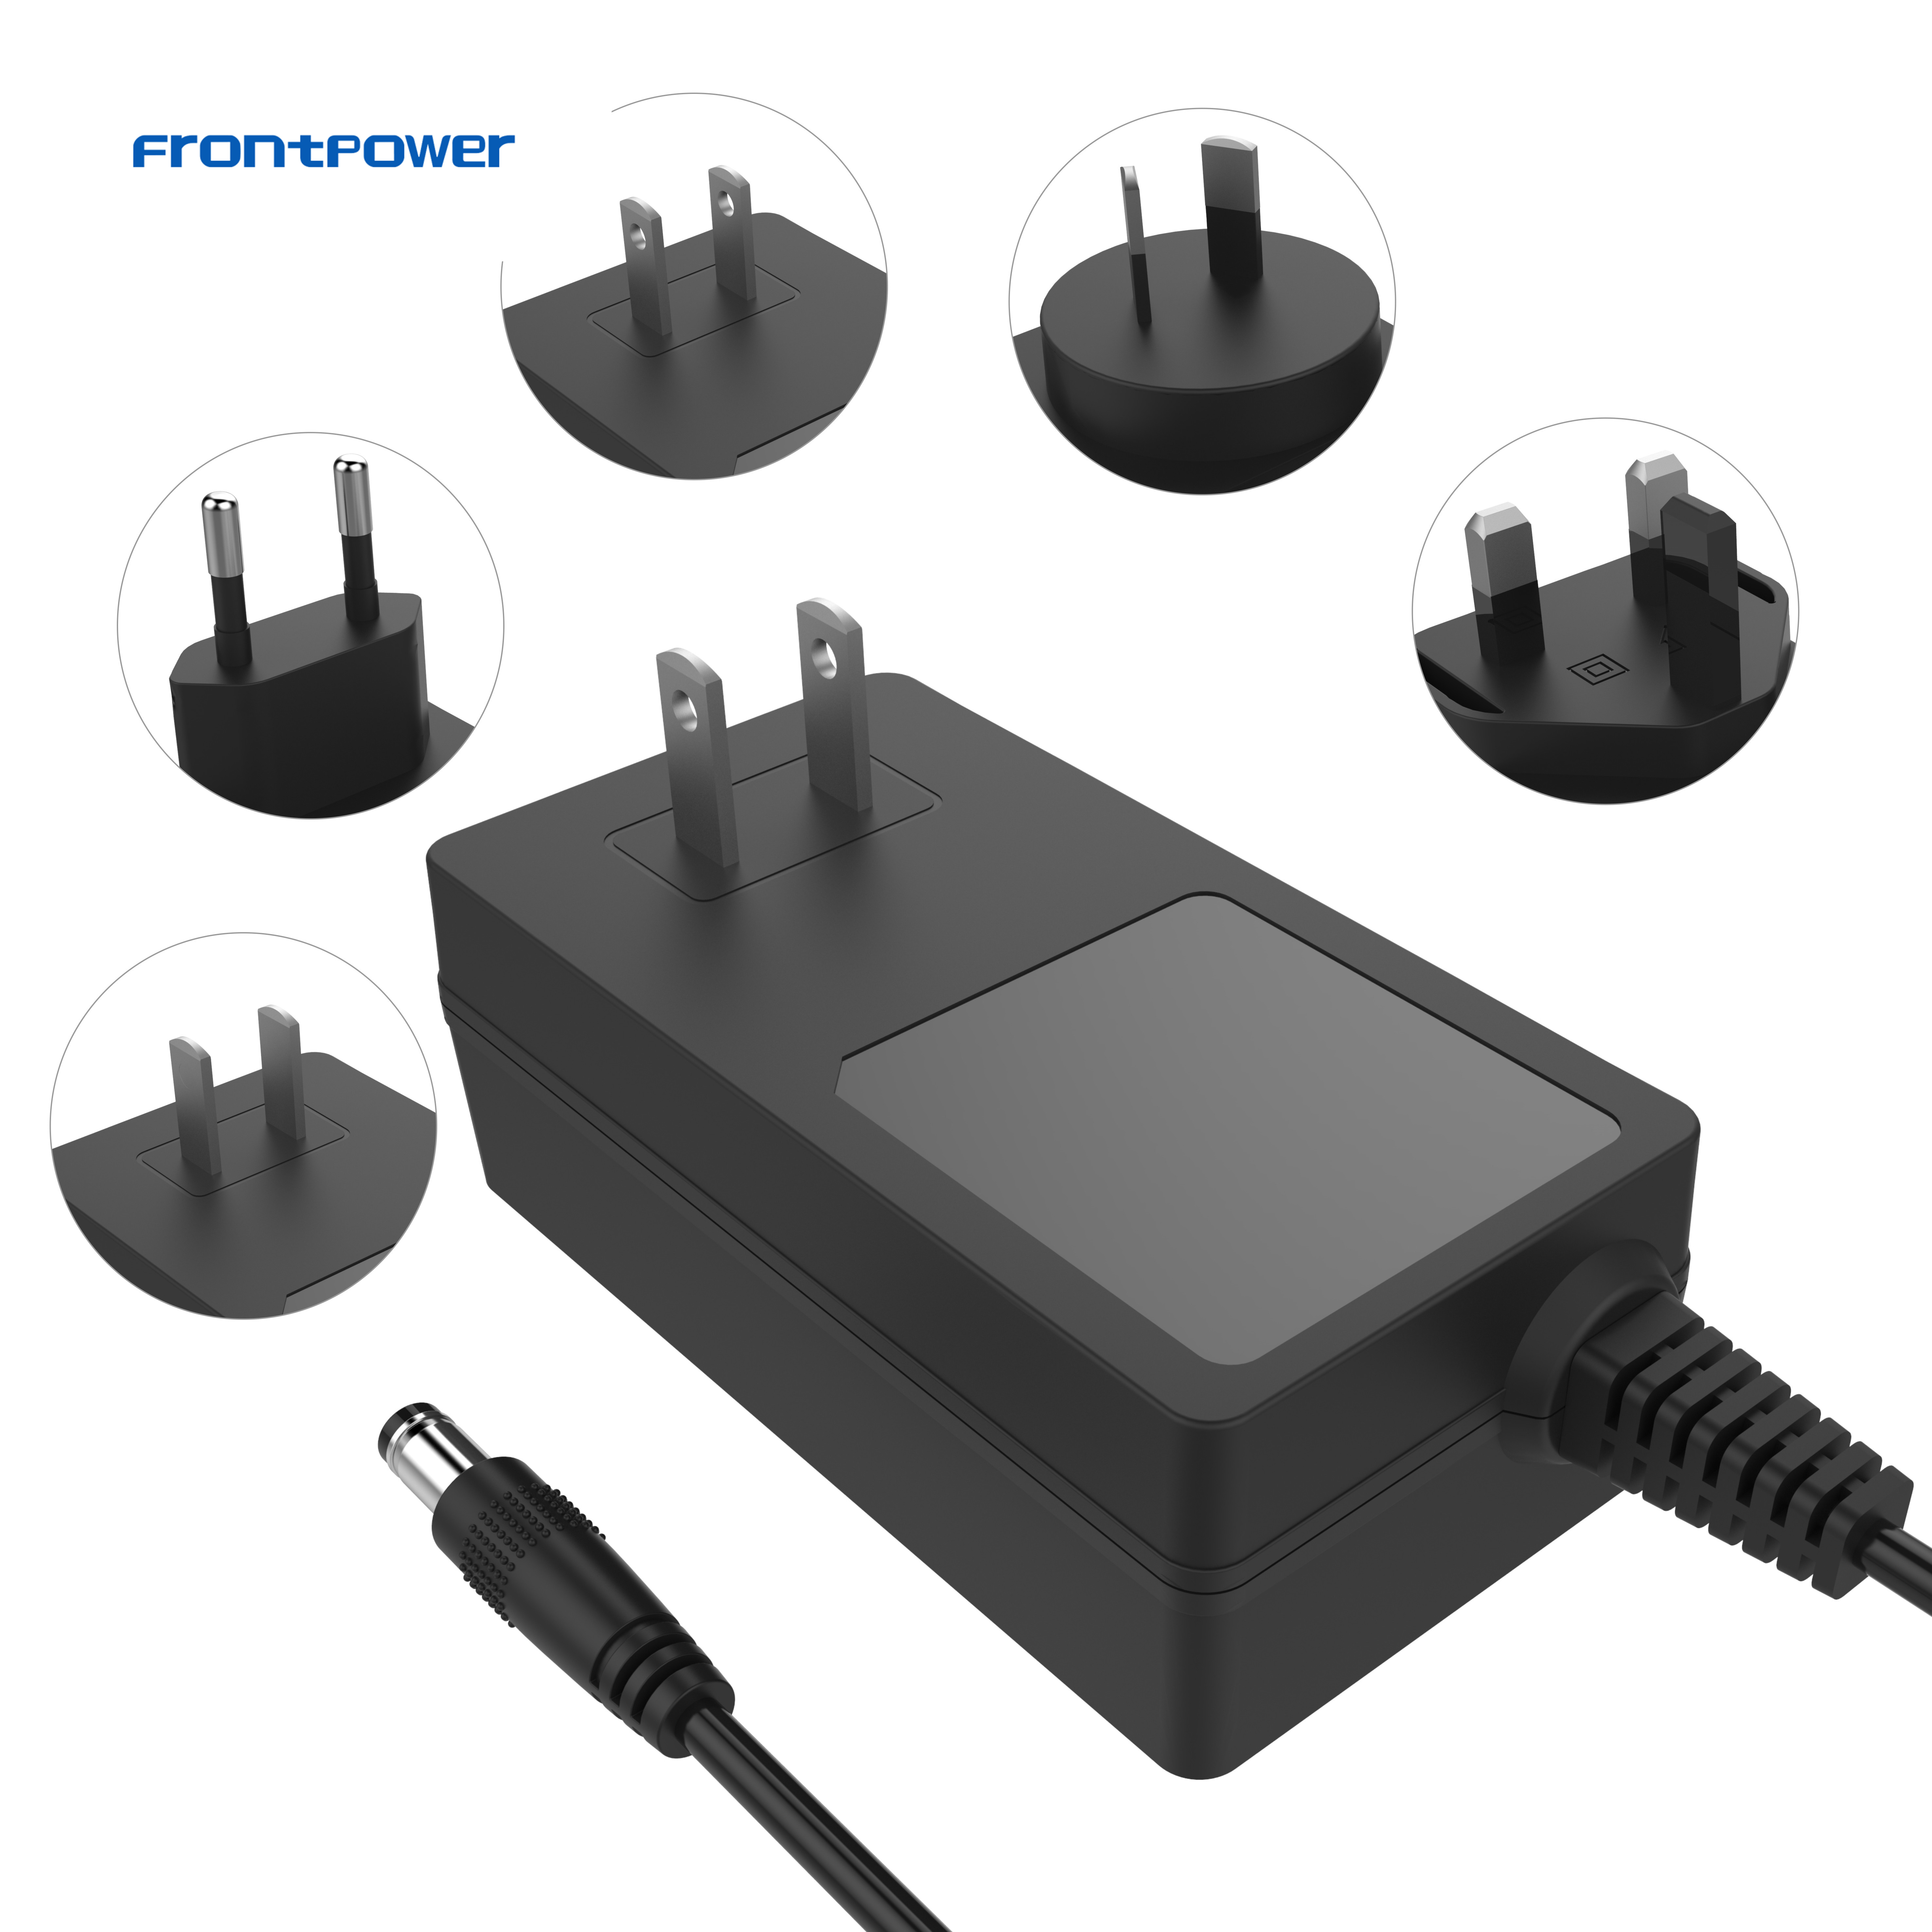 5V 9V 9.3V 15V 24V 36W OEM US EU UK AU Wall Mount Plug SMPS Power Adapter Supply Switch ACDC Charger for POS Machine